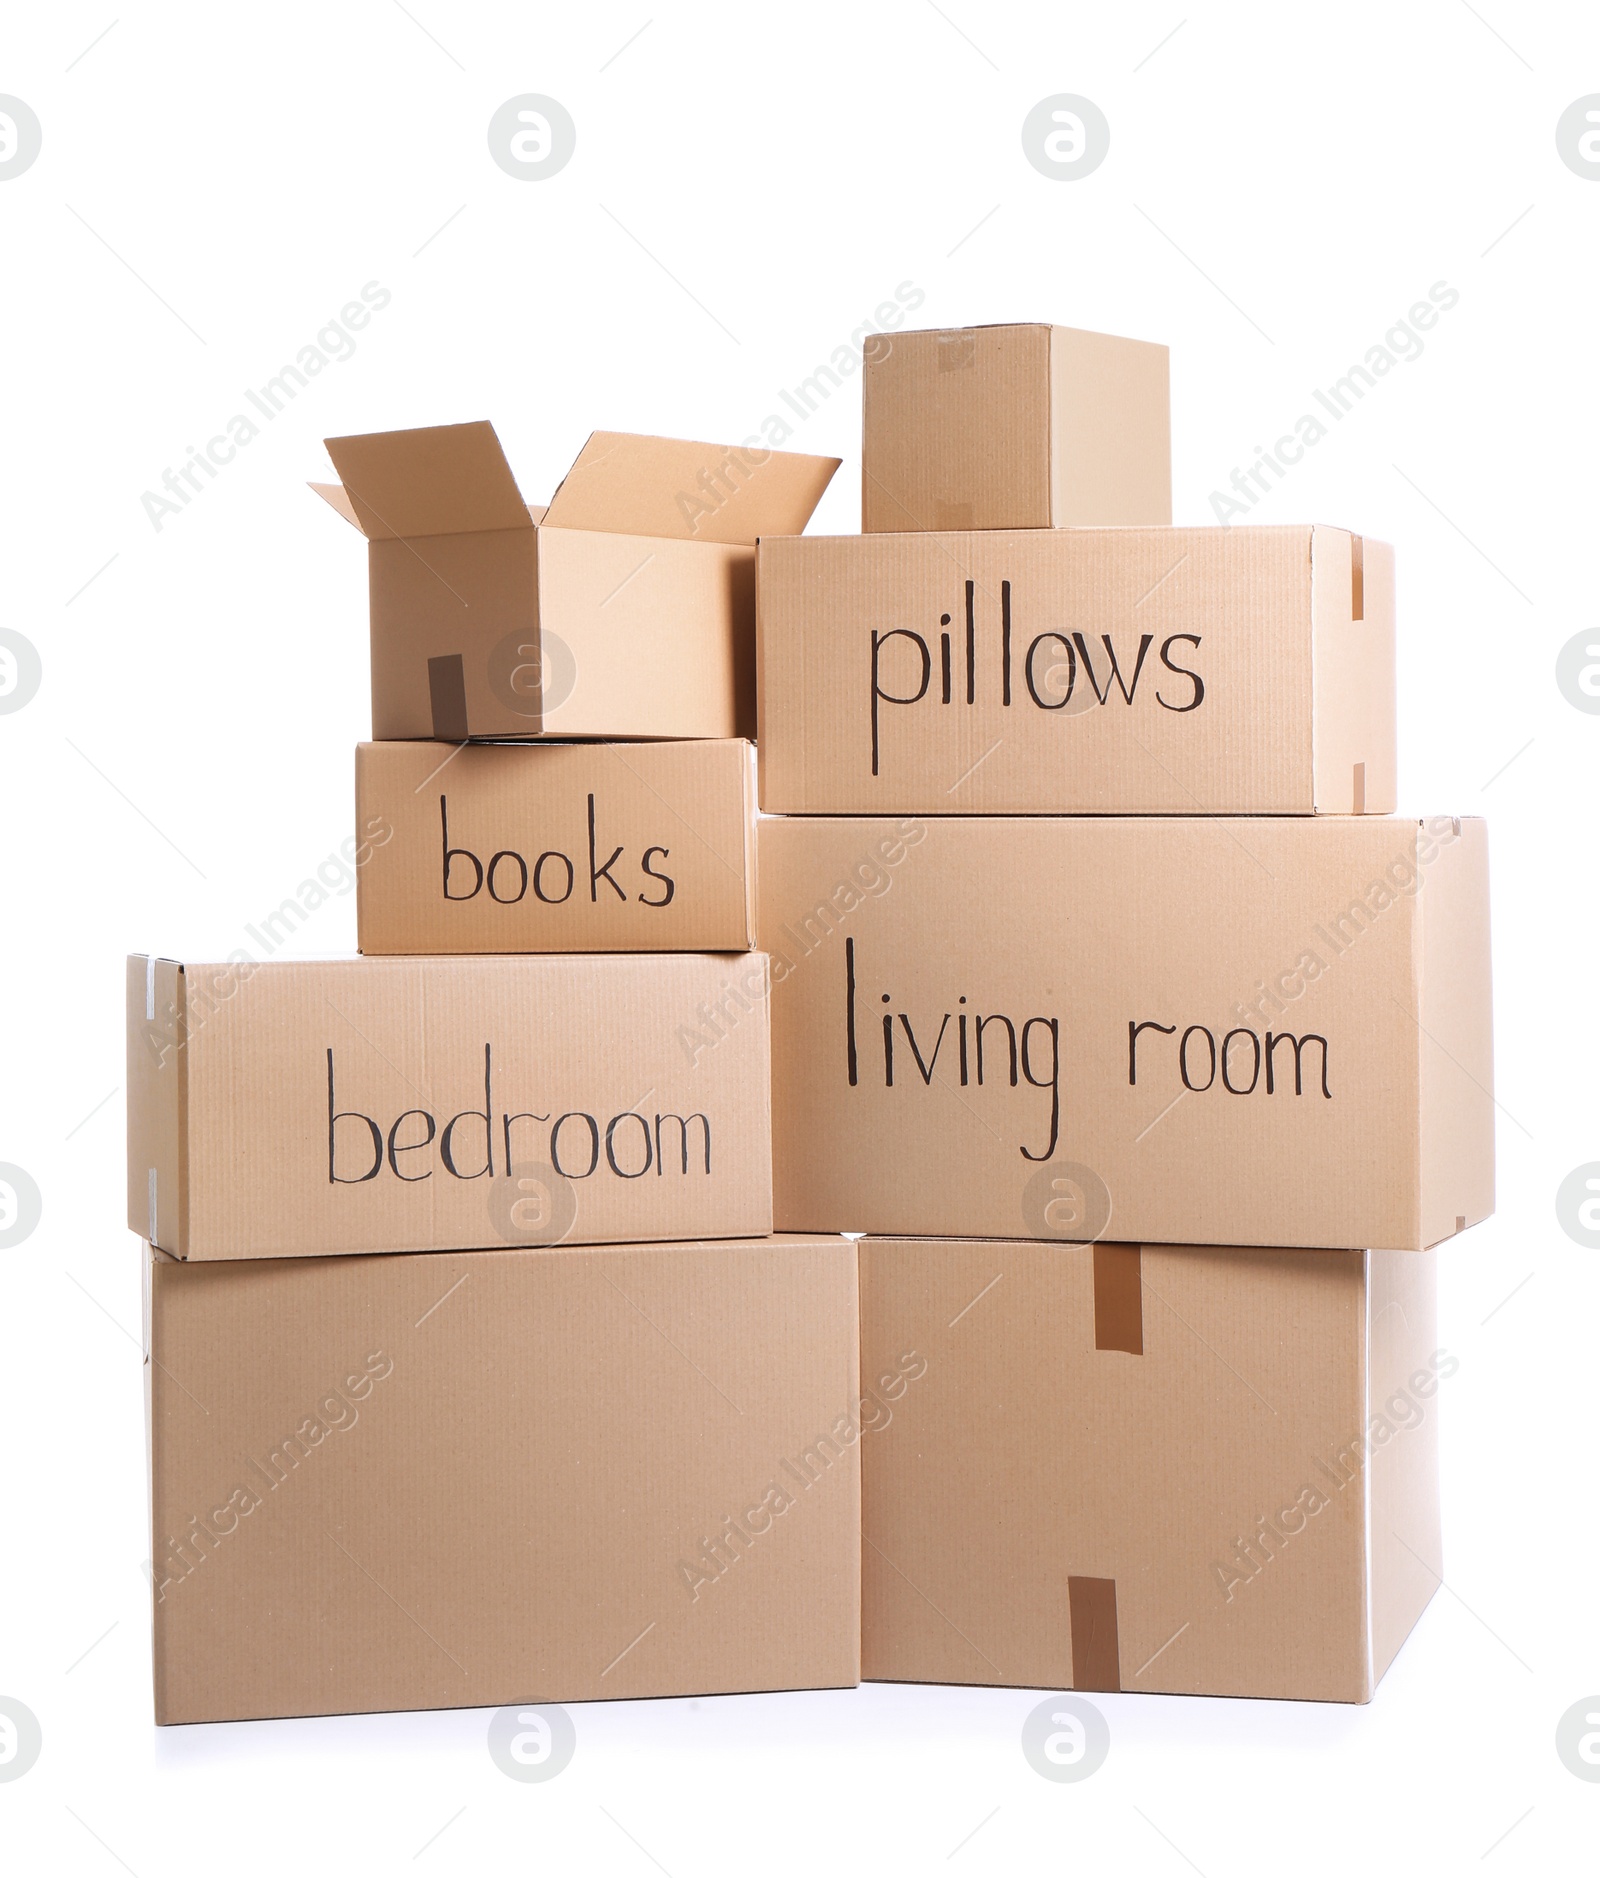 Photo of Cardboard boxes on white background. Moving day